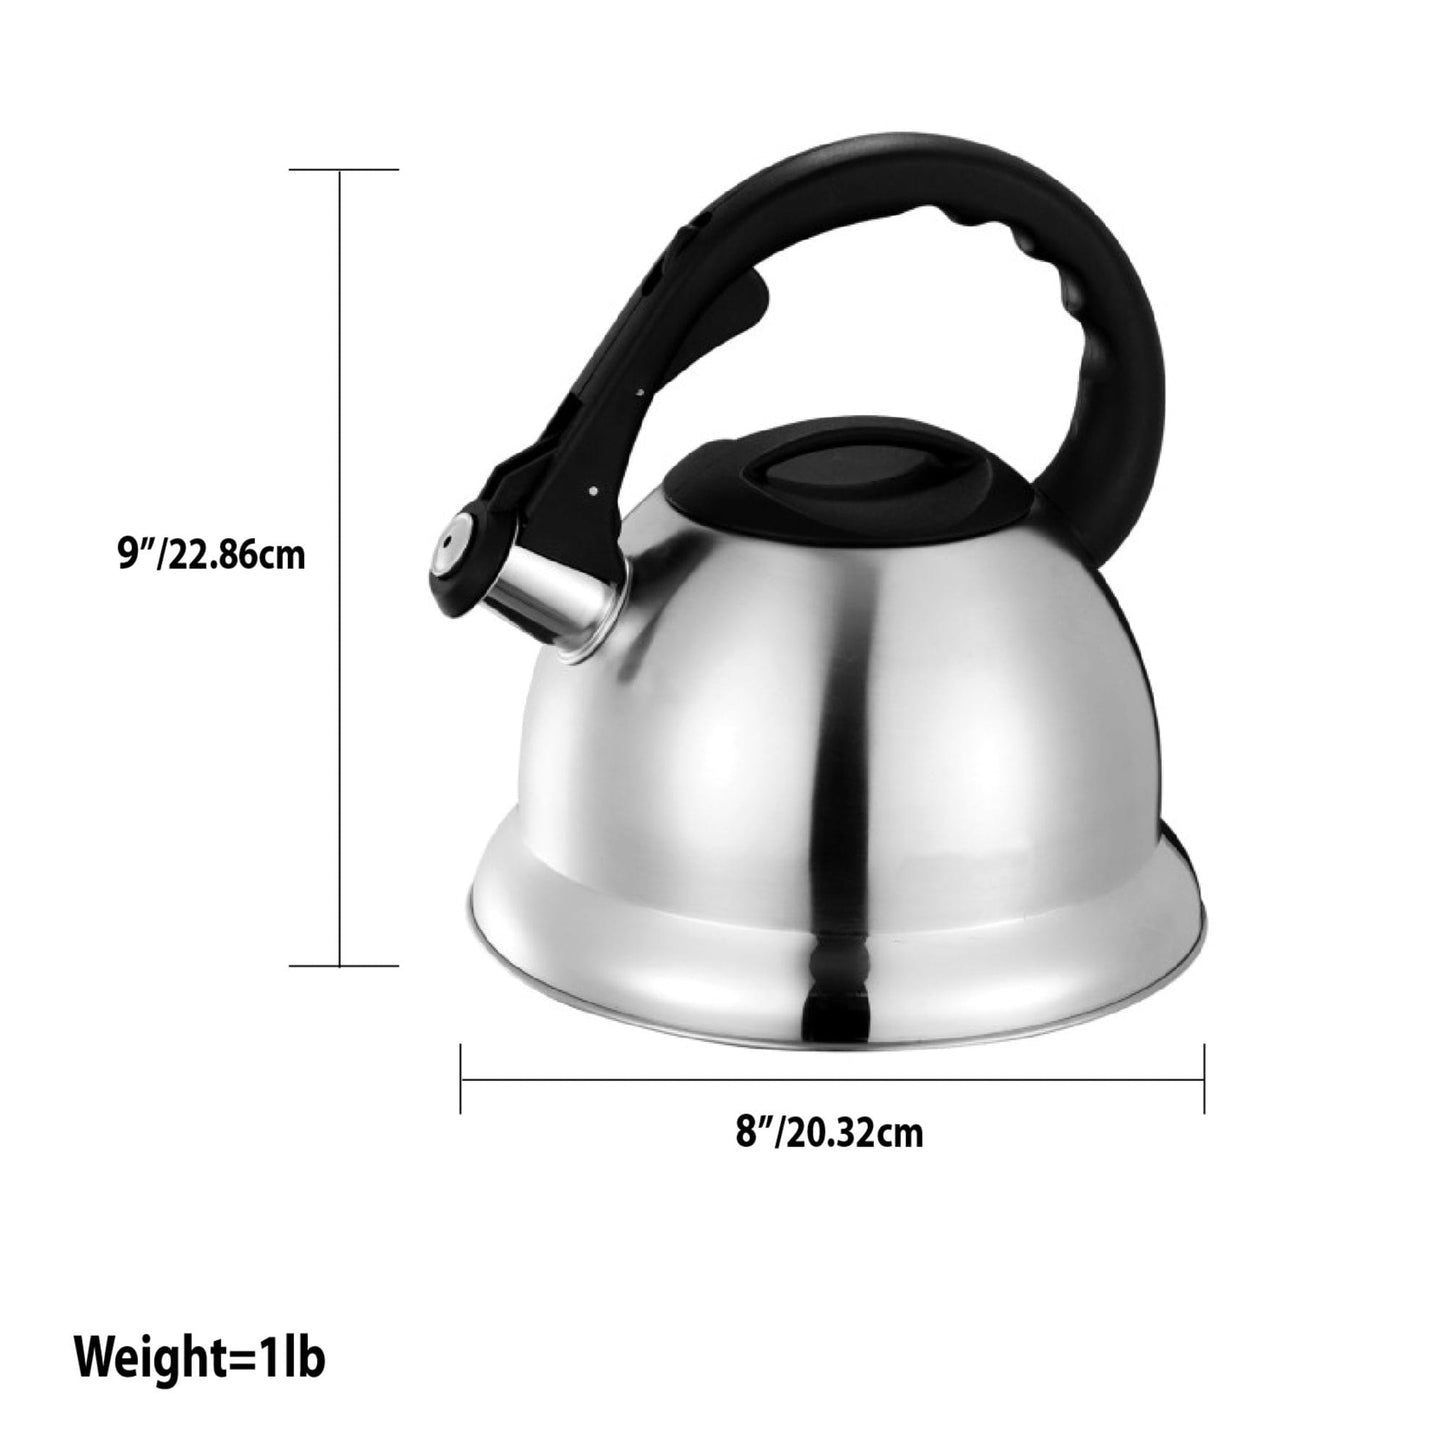 3.0 Liter Brushed Stainless Steel Tea Kettle with Easy Grip Textured Handle, Silver